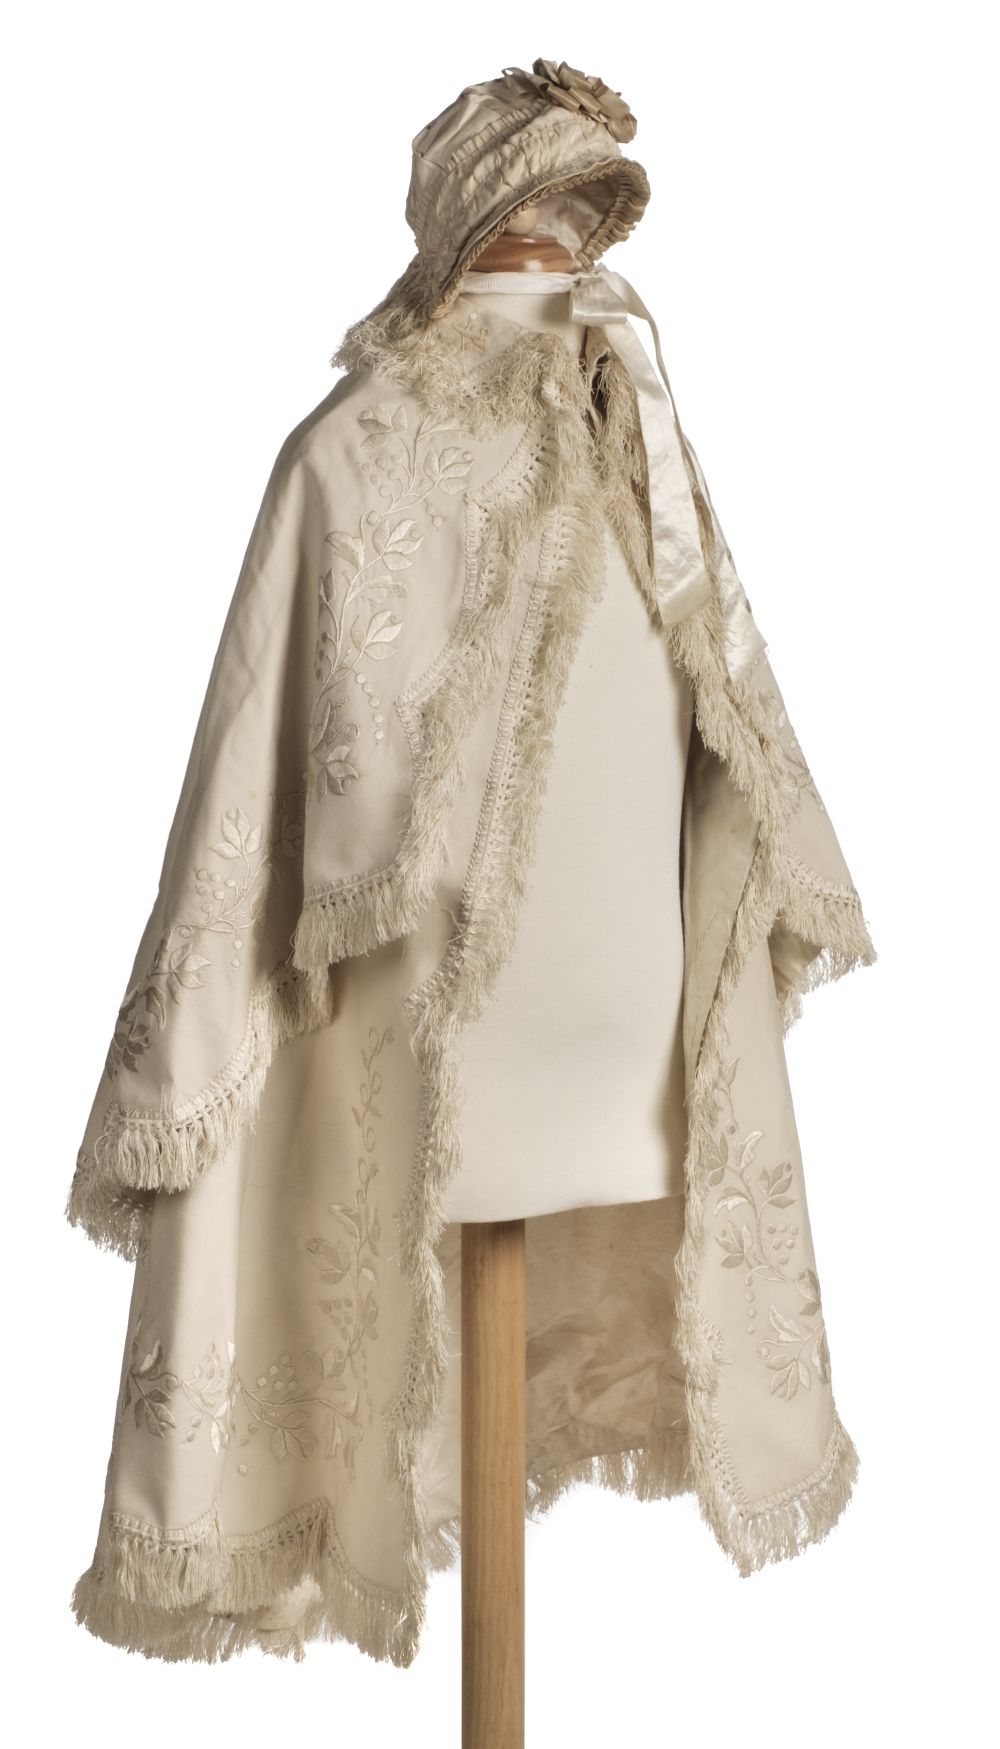 * Children's clothes. A christening cape, late Victorian or Edwardian